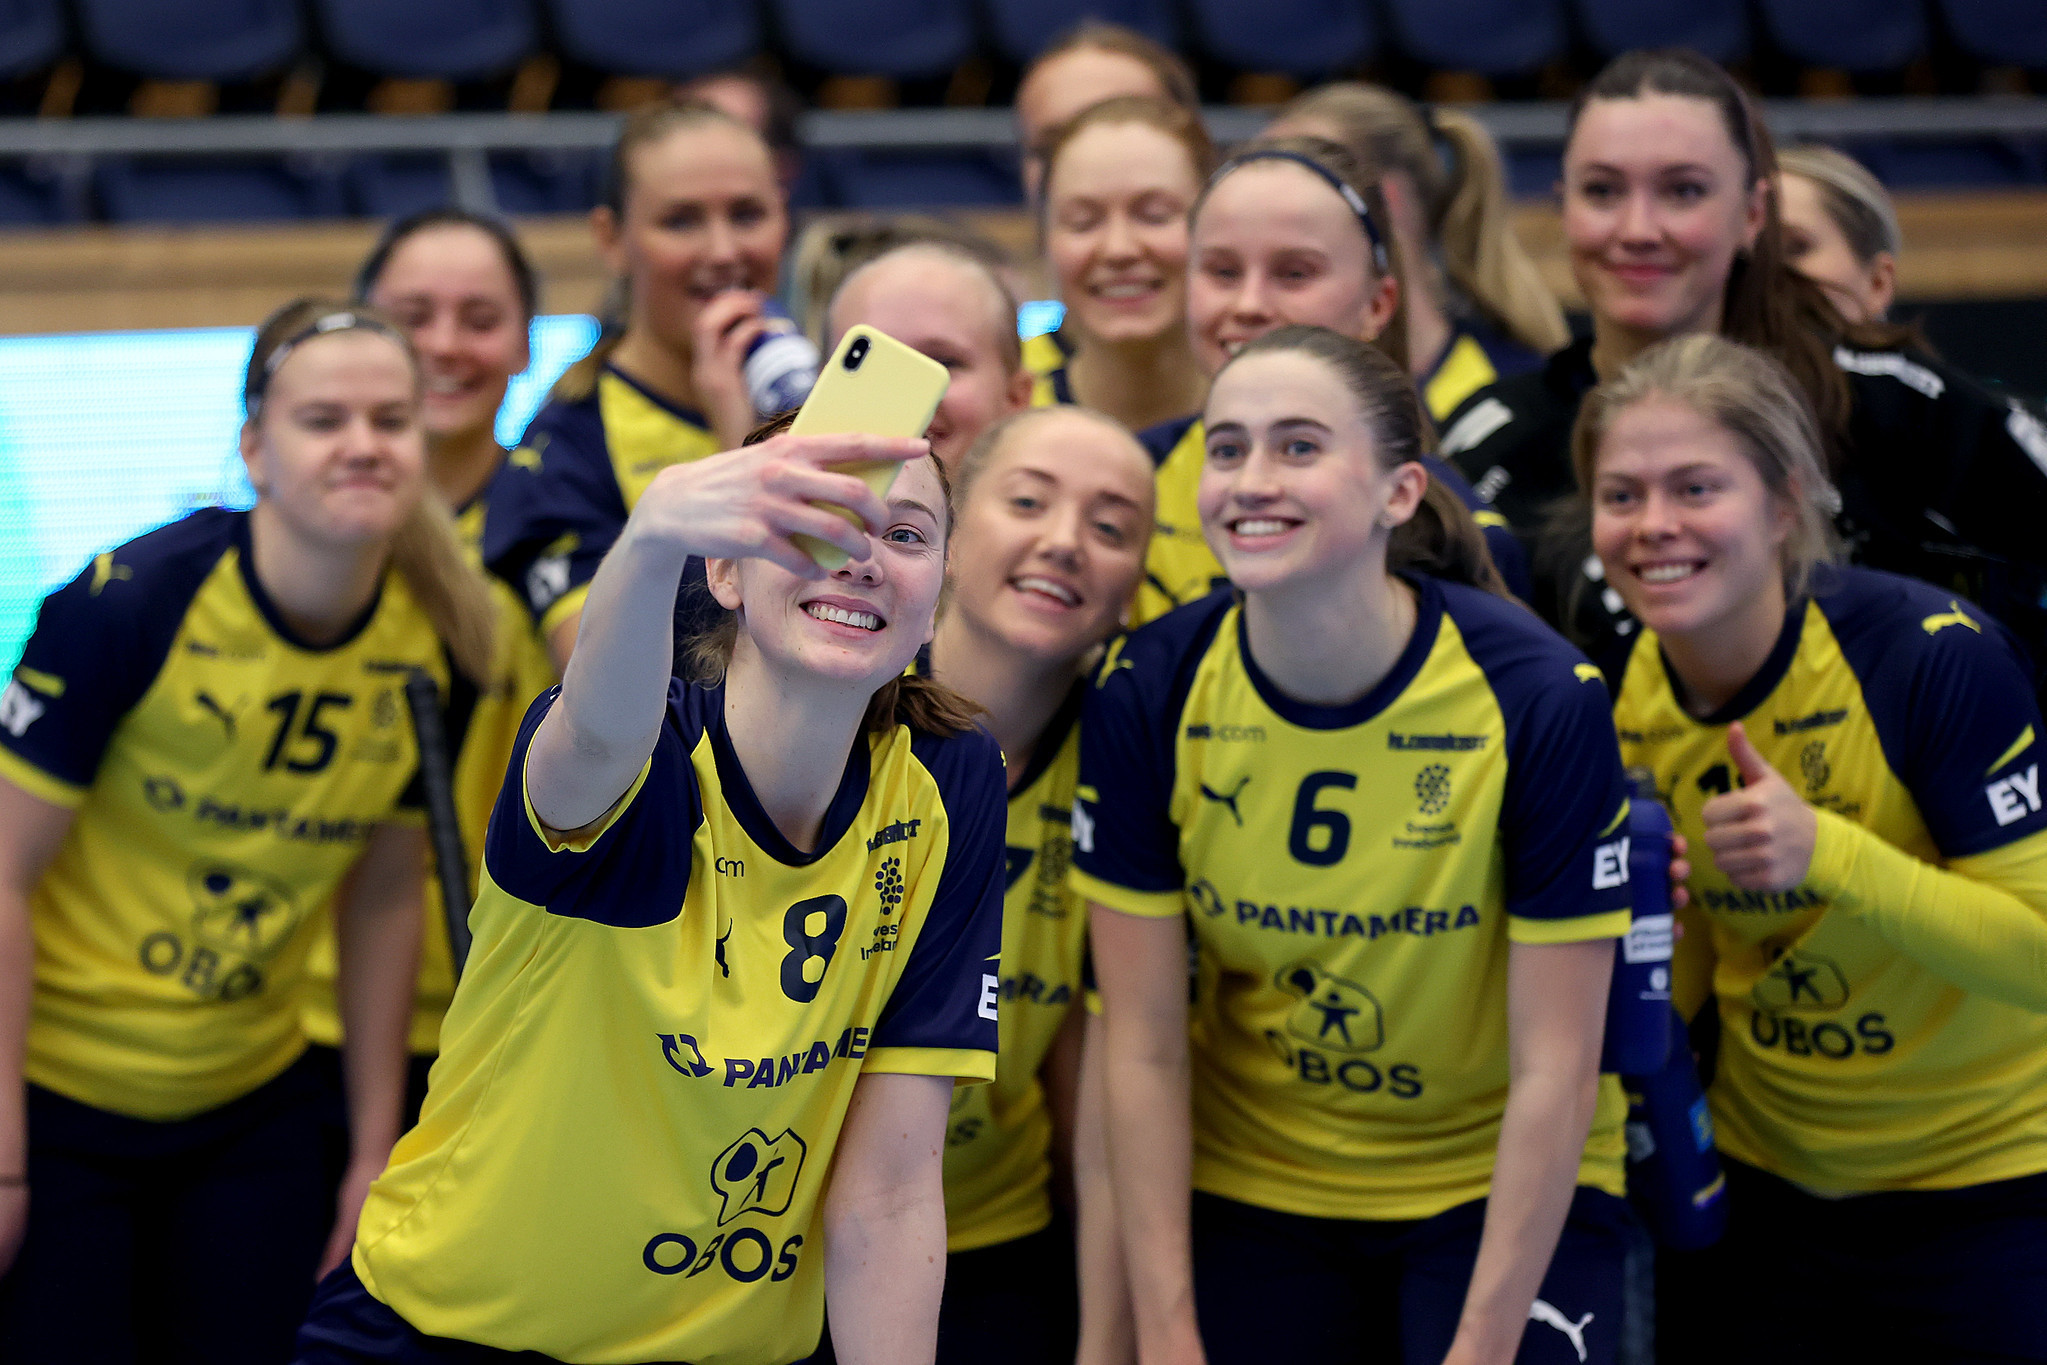 Sweden celebrate with a selfie after another ruthless display saw them beat Germany 20-0 ©IFF/Per Wiklund